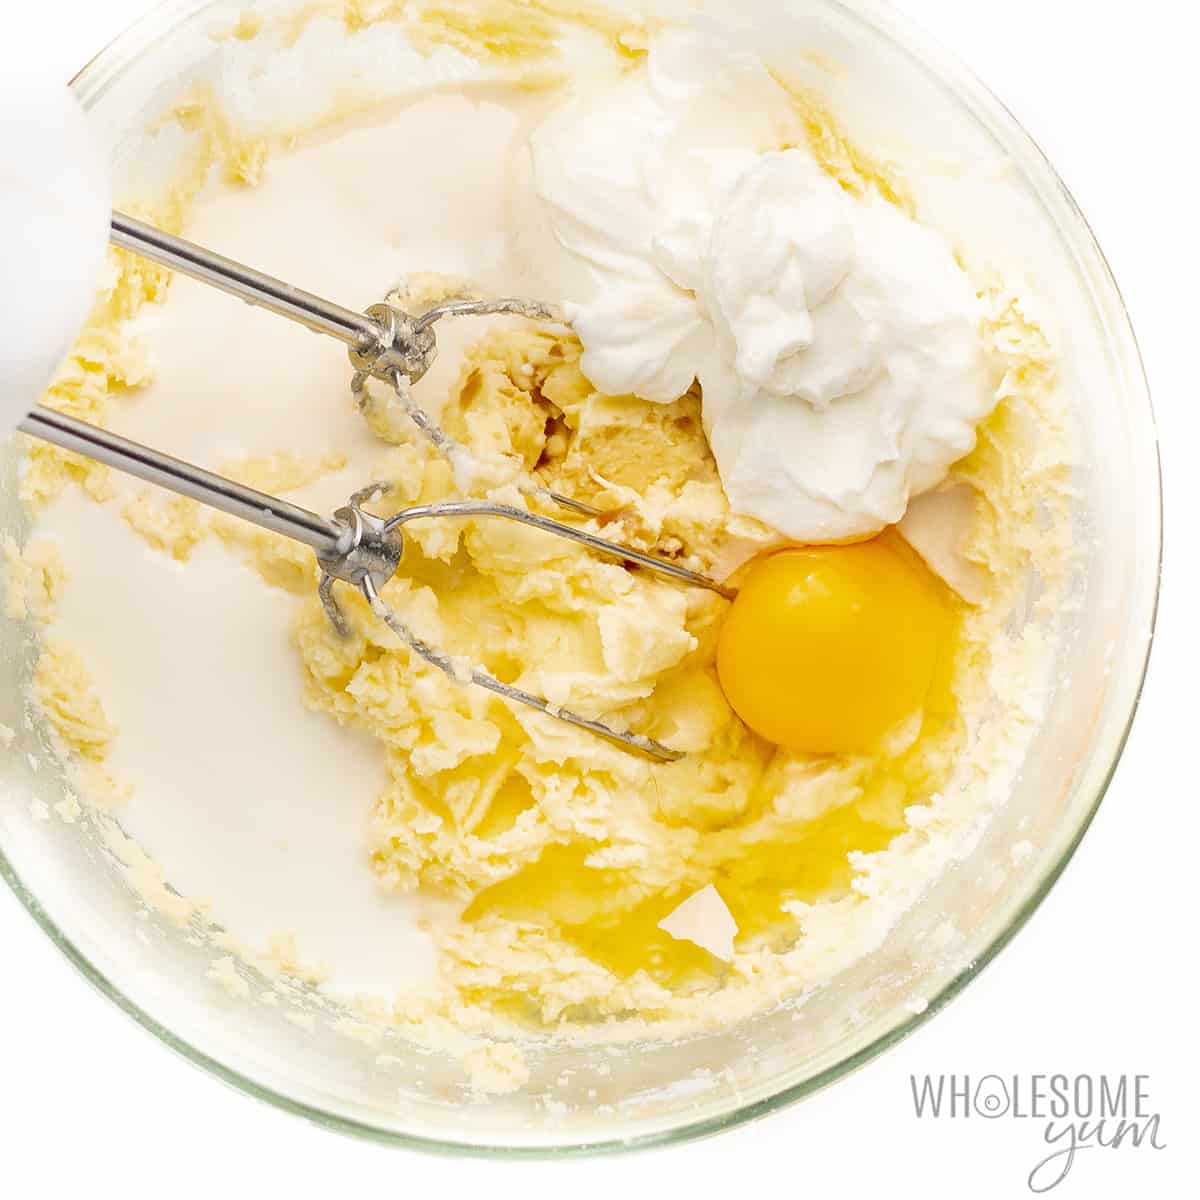 Wet ingredients added to butter and sweetener mixture in a bowl.